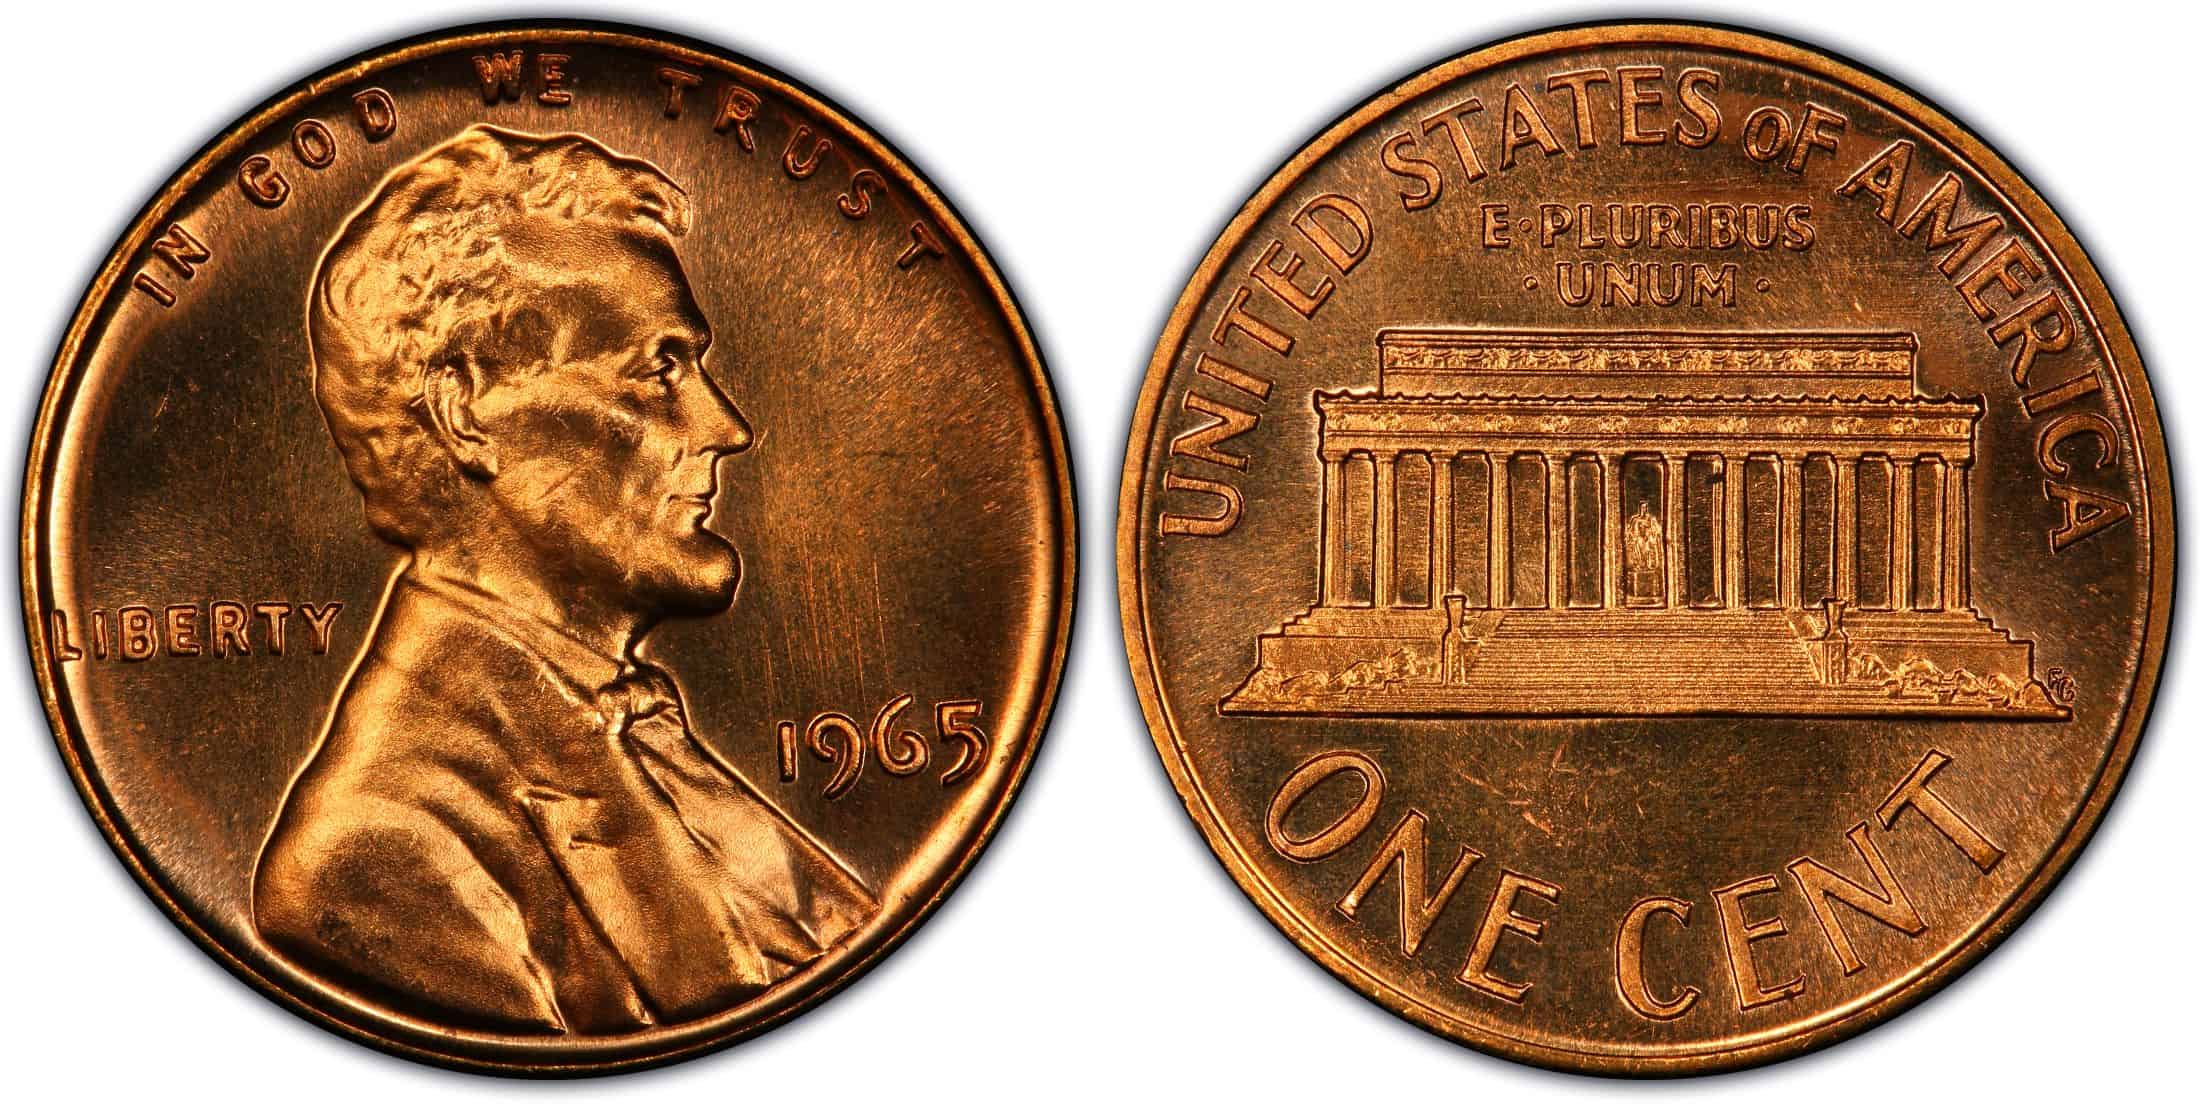 1965 SMS Lincoln penny